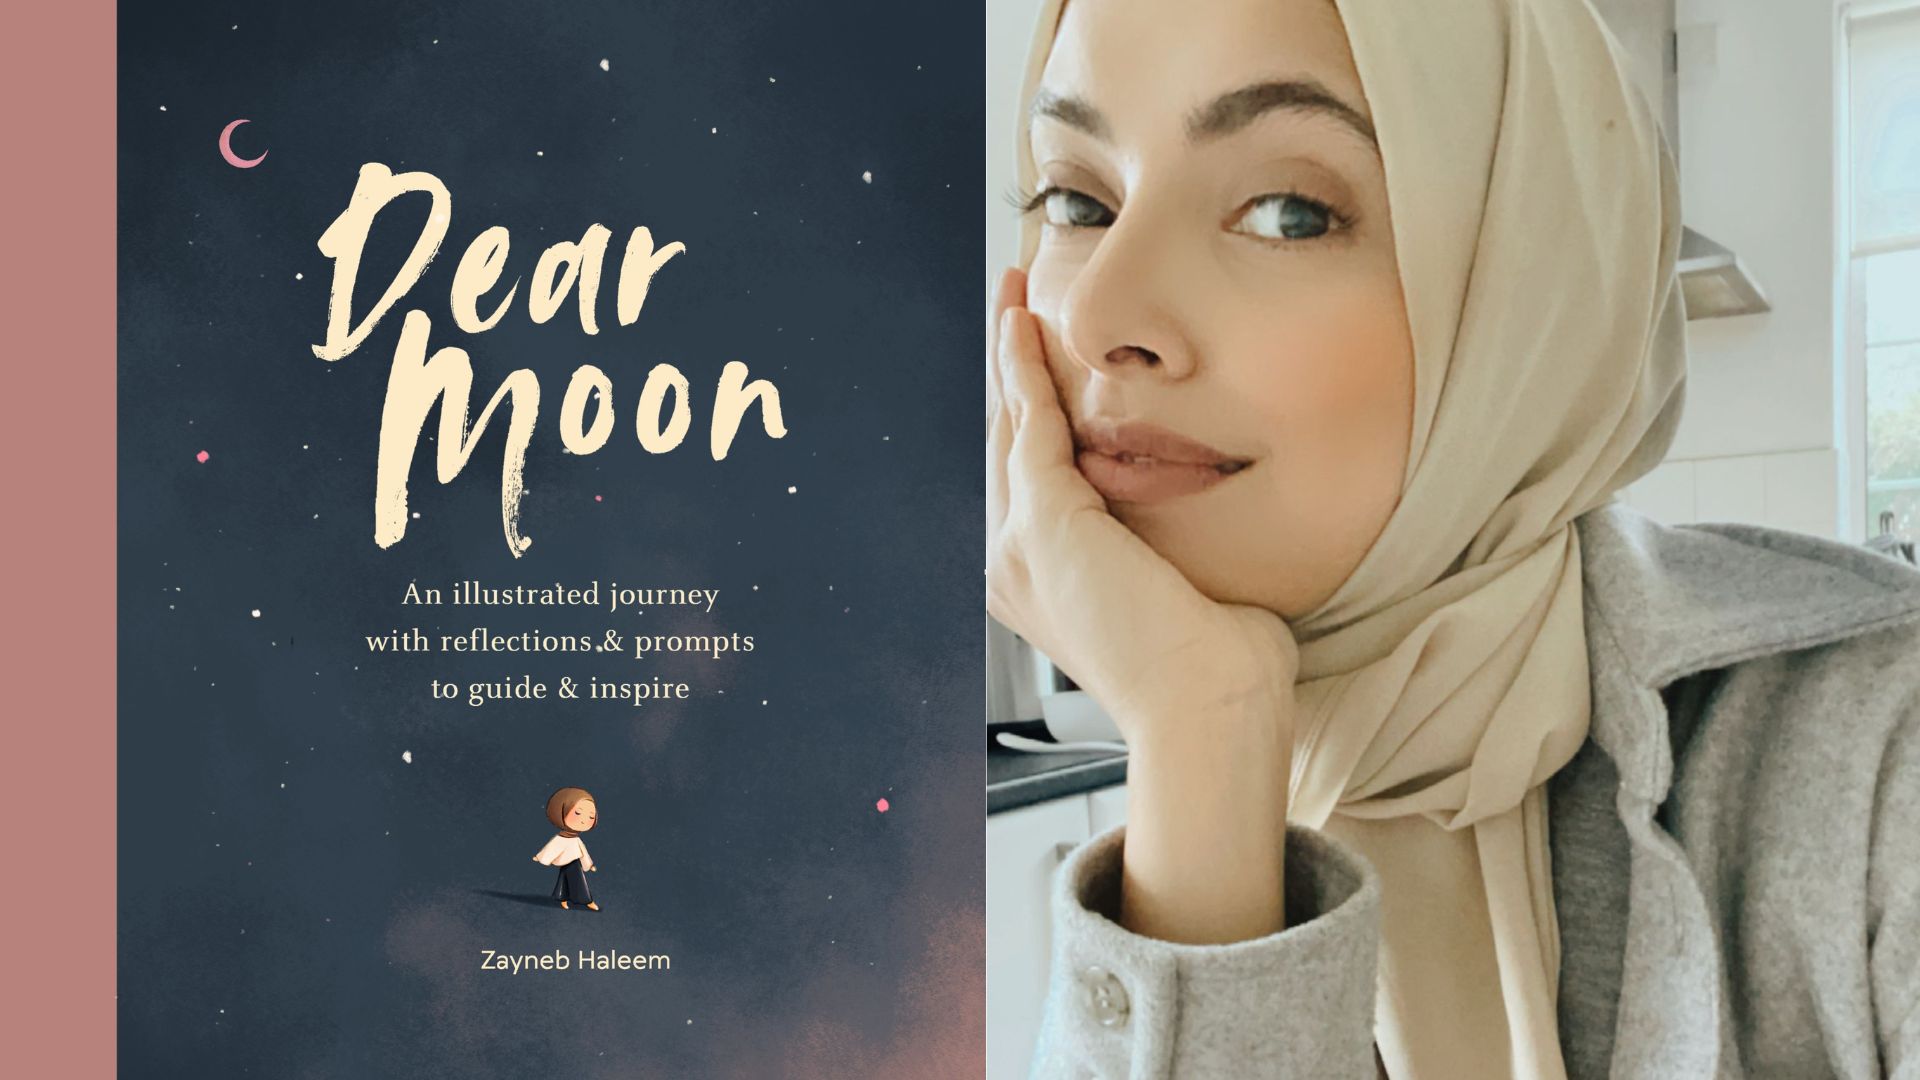 The Bookseller – Rights – Ebury snaps up Zayneb Haleem’s first illustrated book for adults